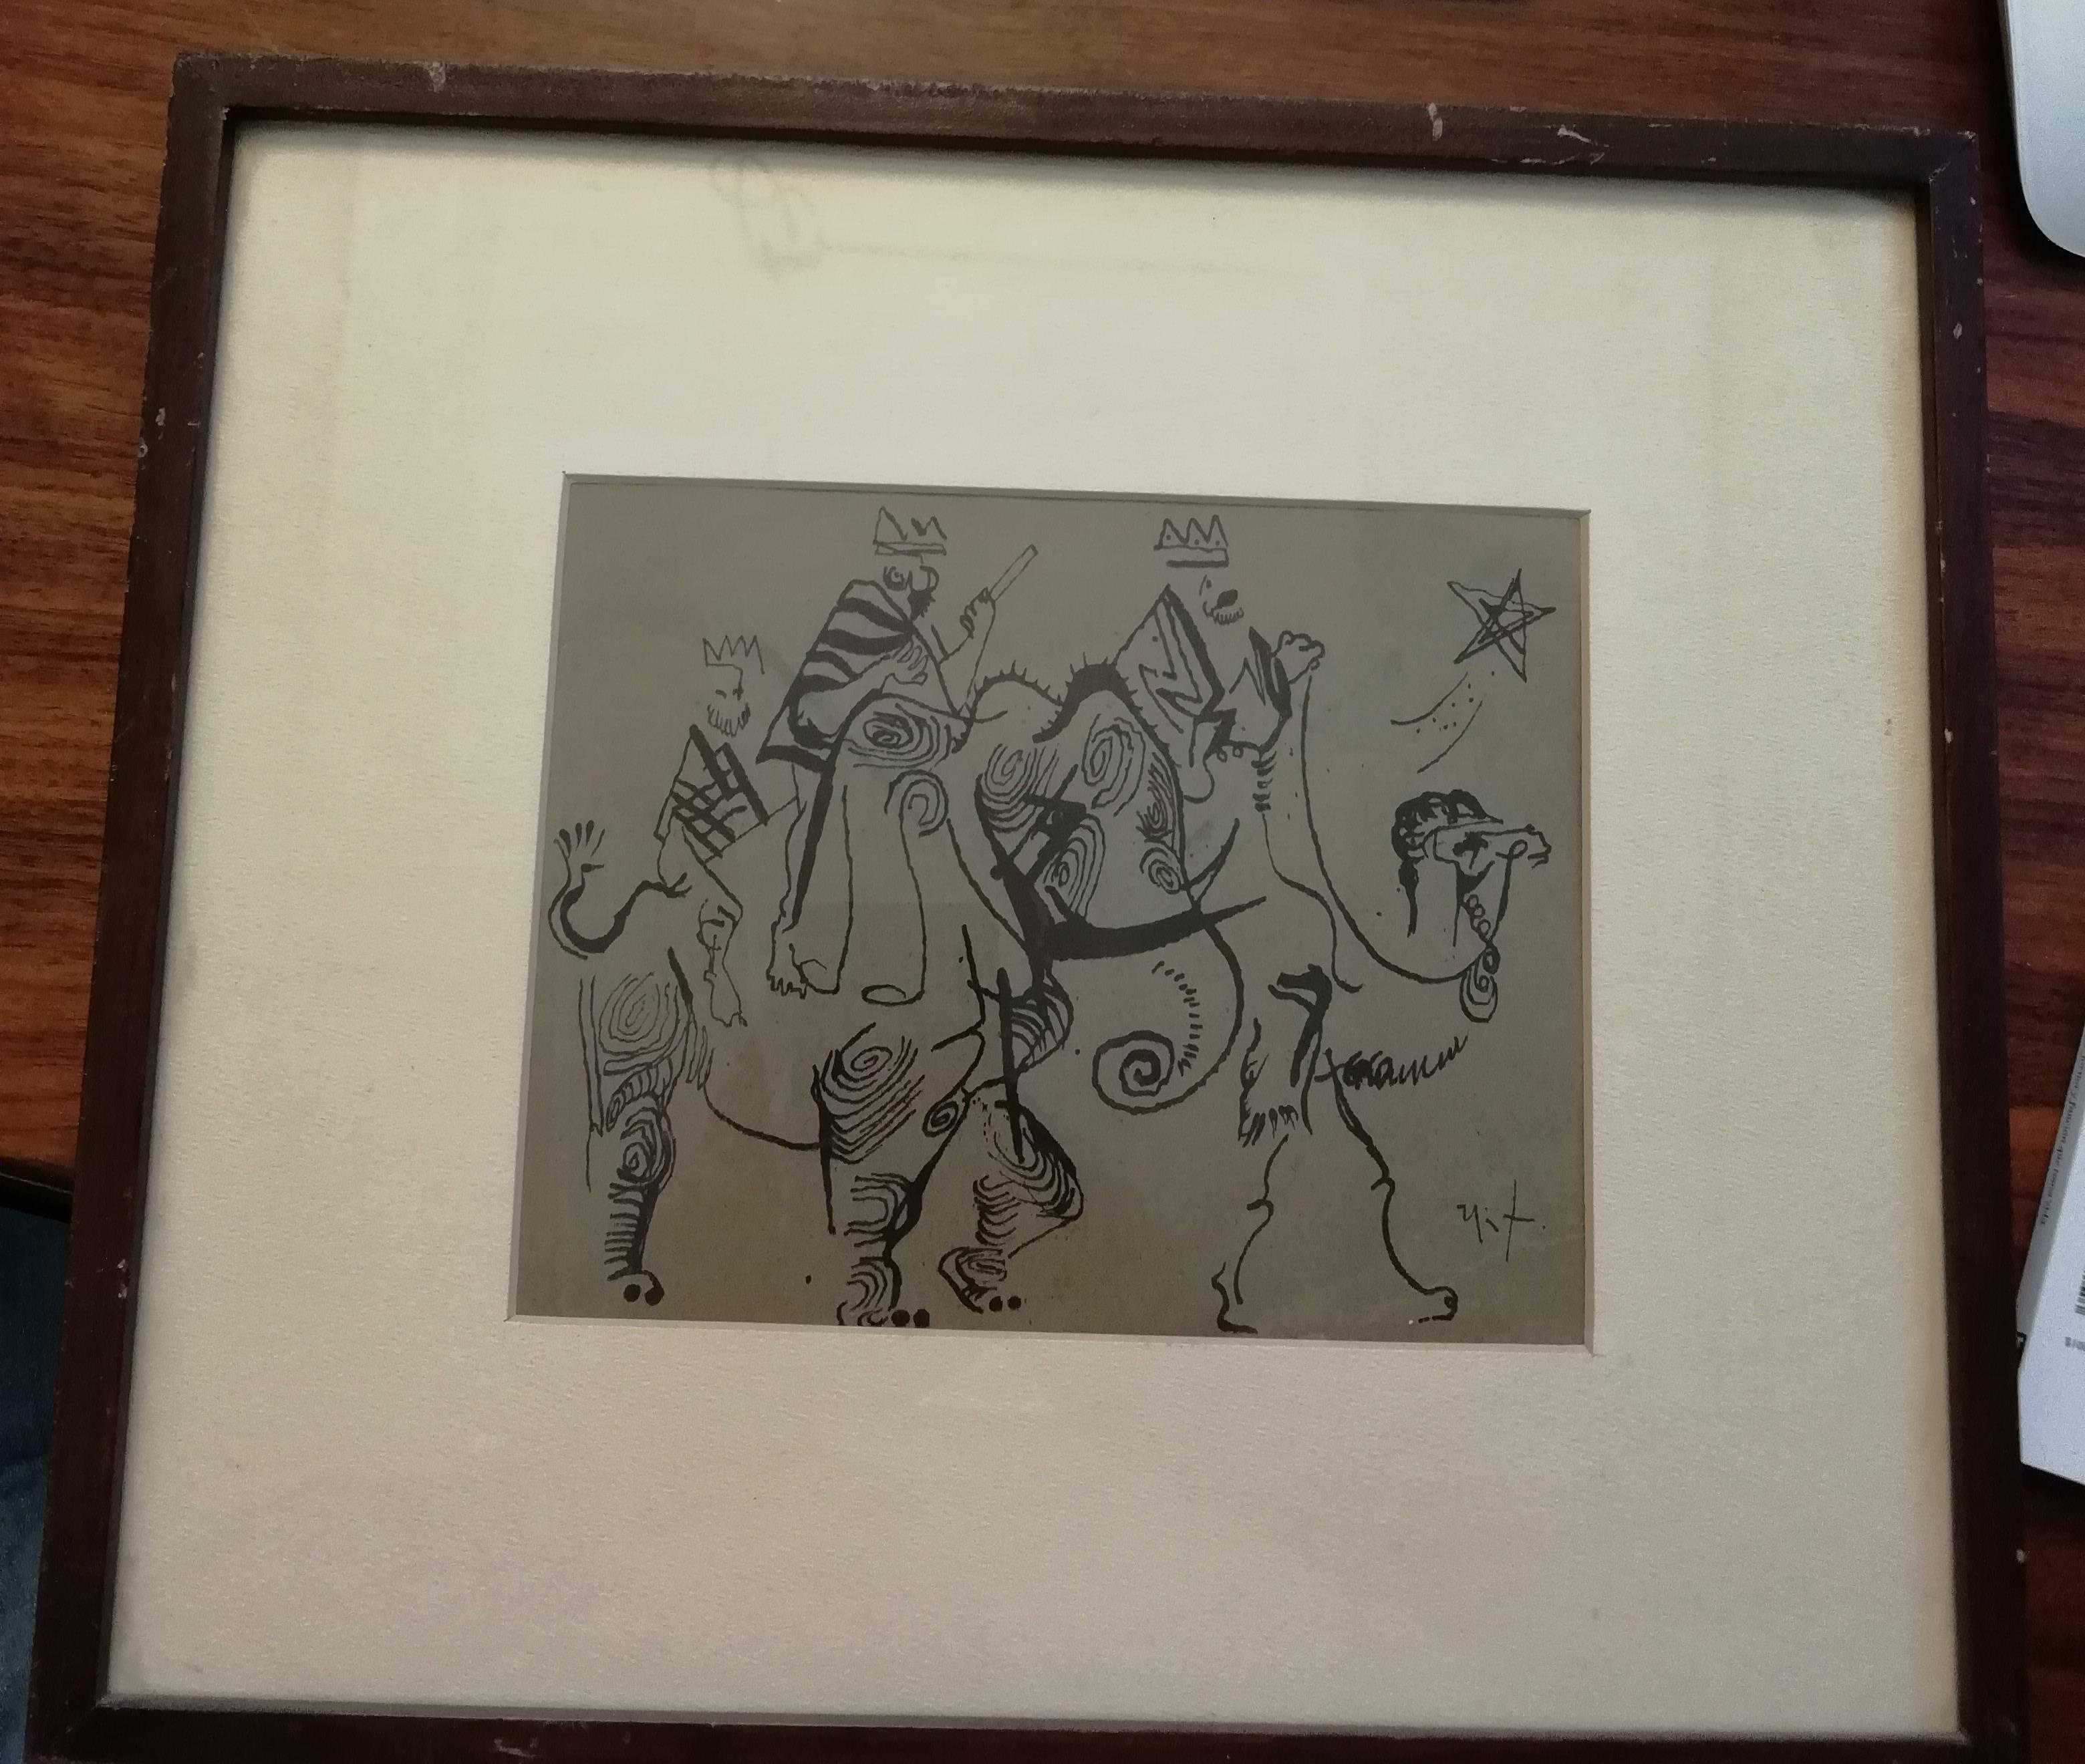 A fine ink on paper drawing depicting the three wise men by Mexican artist Rodolfo Nieto, circa 1970. The drawing has a wood frame and beige passe-partout.

Signed on bottom right.

Drawing's dimensions: 15 x 19 cm. (6 x 7.5 in.)

Rodolfo